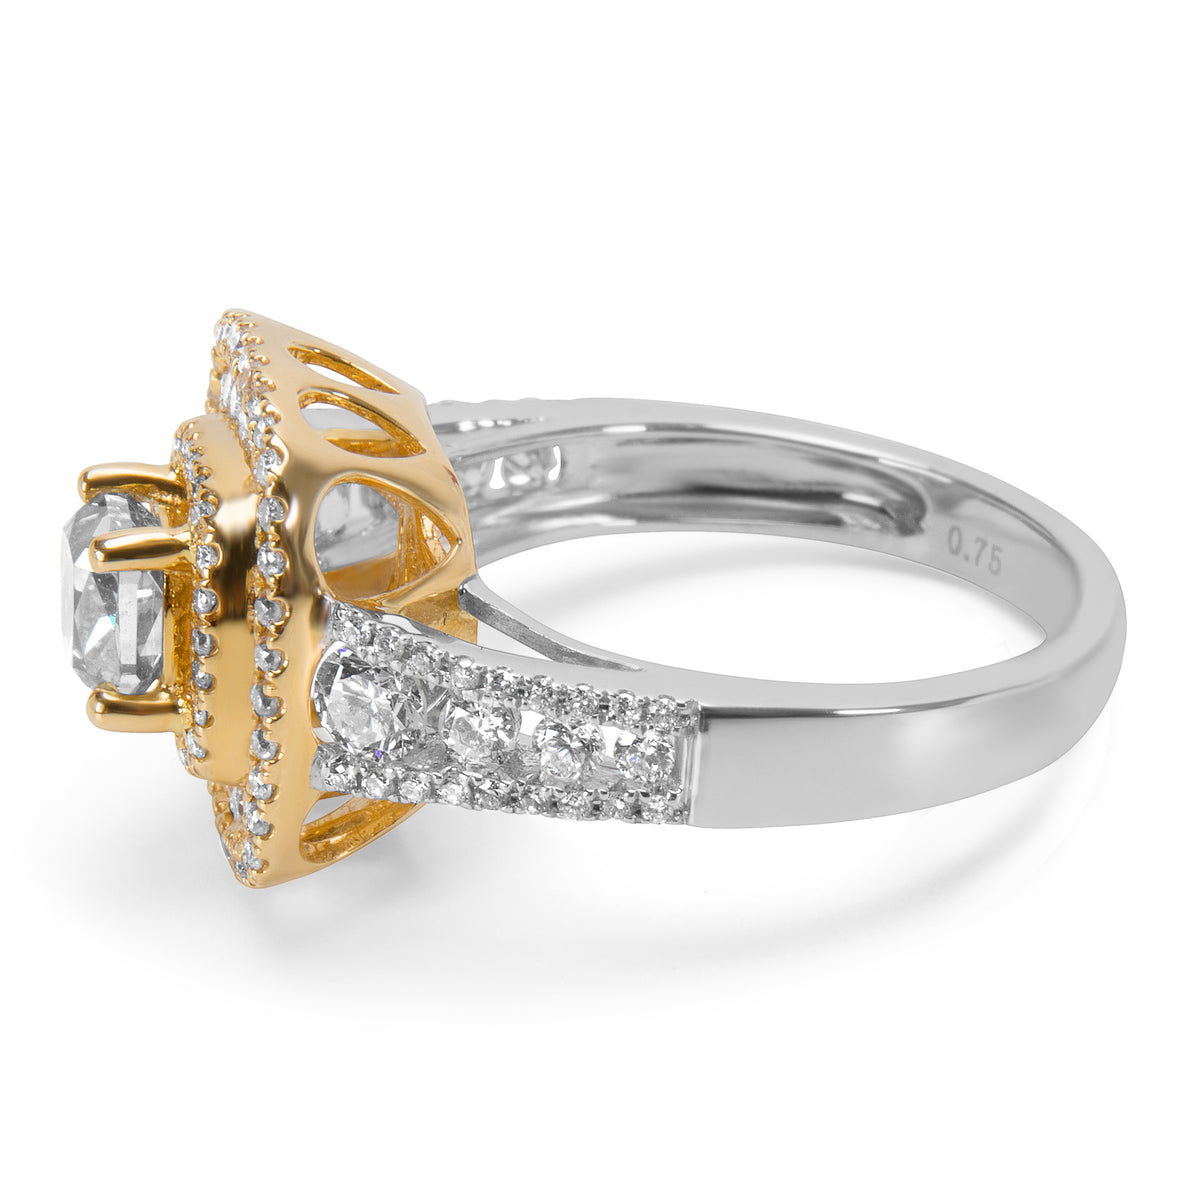 BRAND NEW Brown Diamond Engagement Ring in 18K 2 Tone Gold (1.81 CTW)